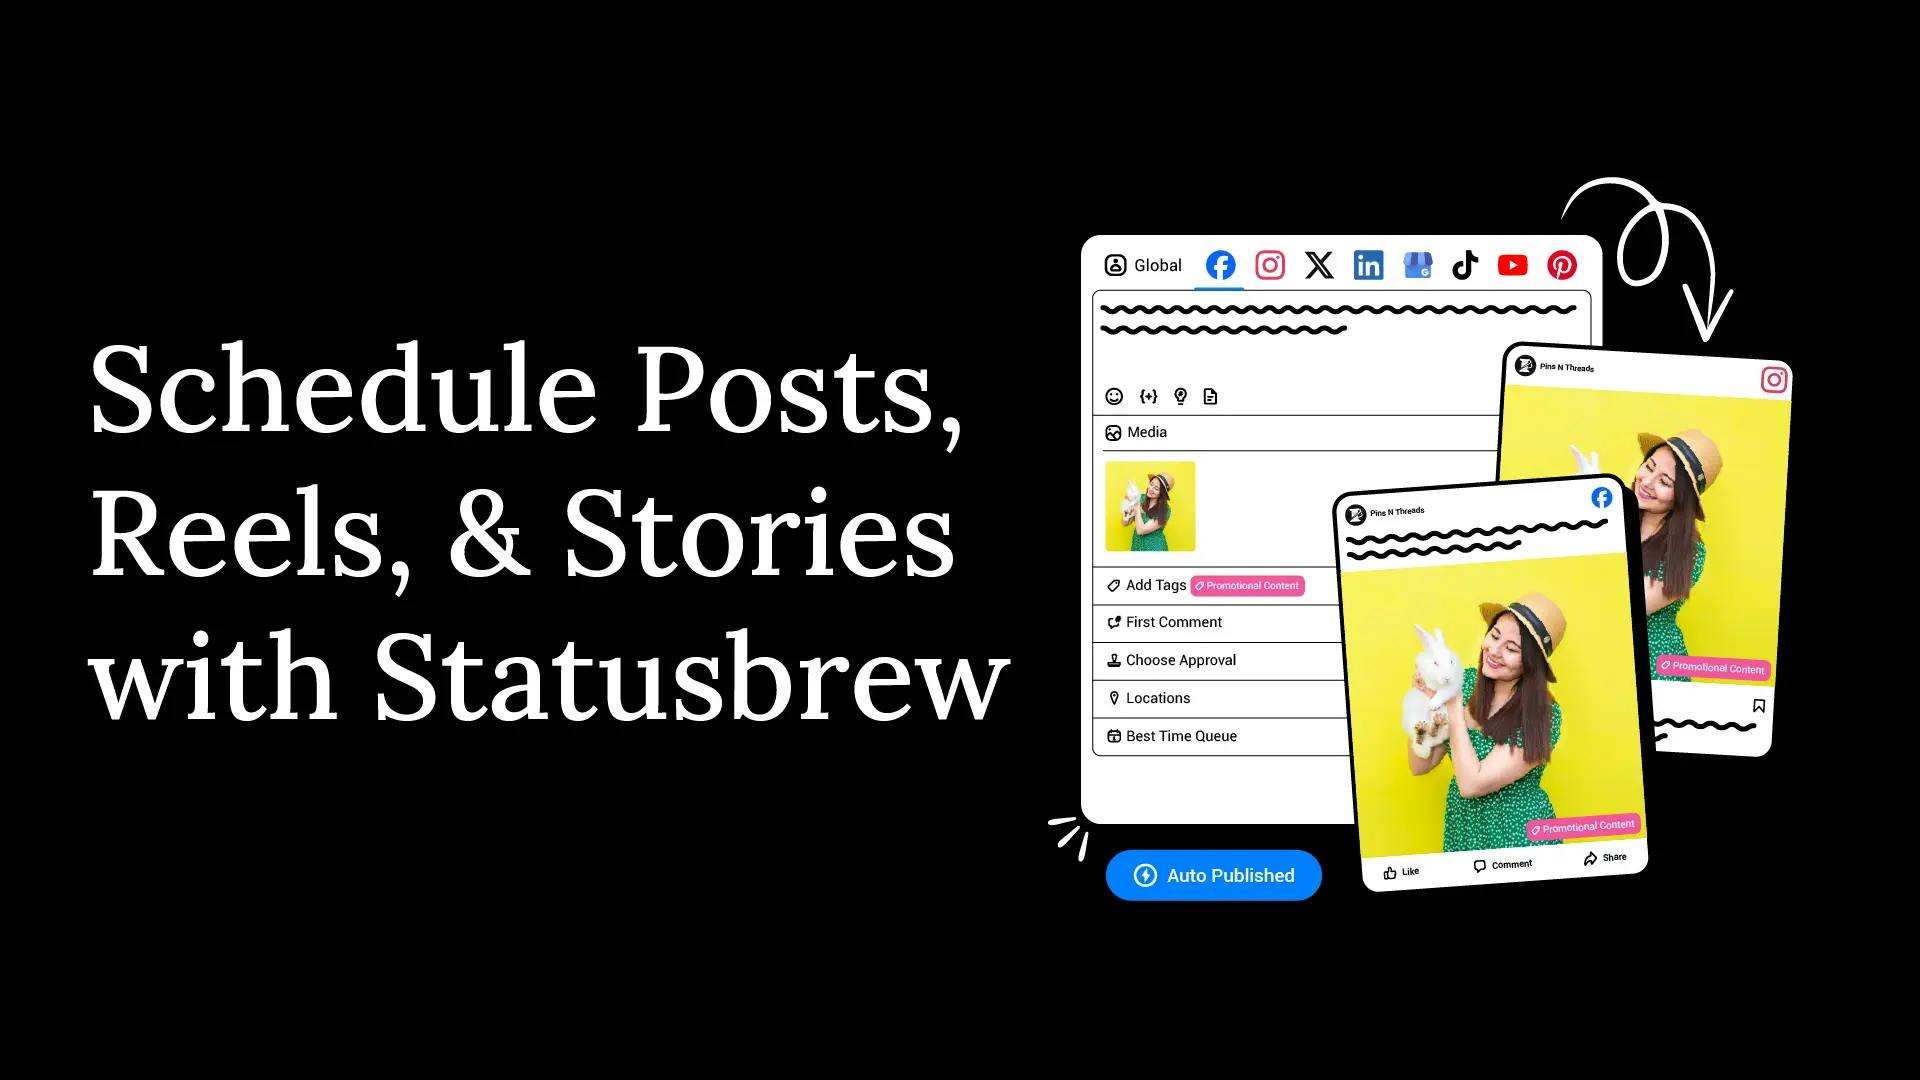 Image highlights Statusbrew's post scheduling features